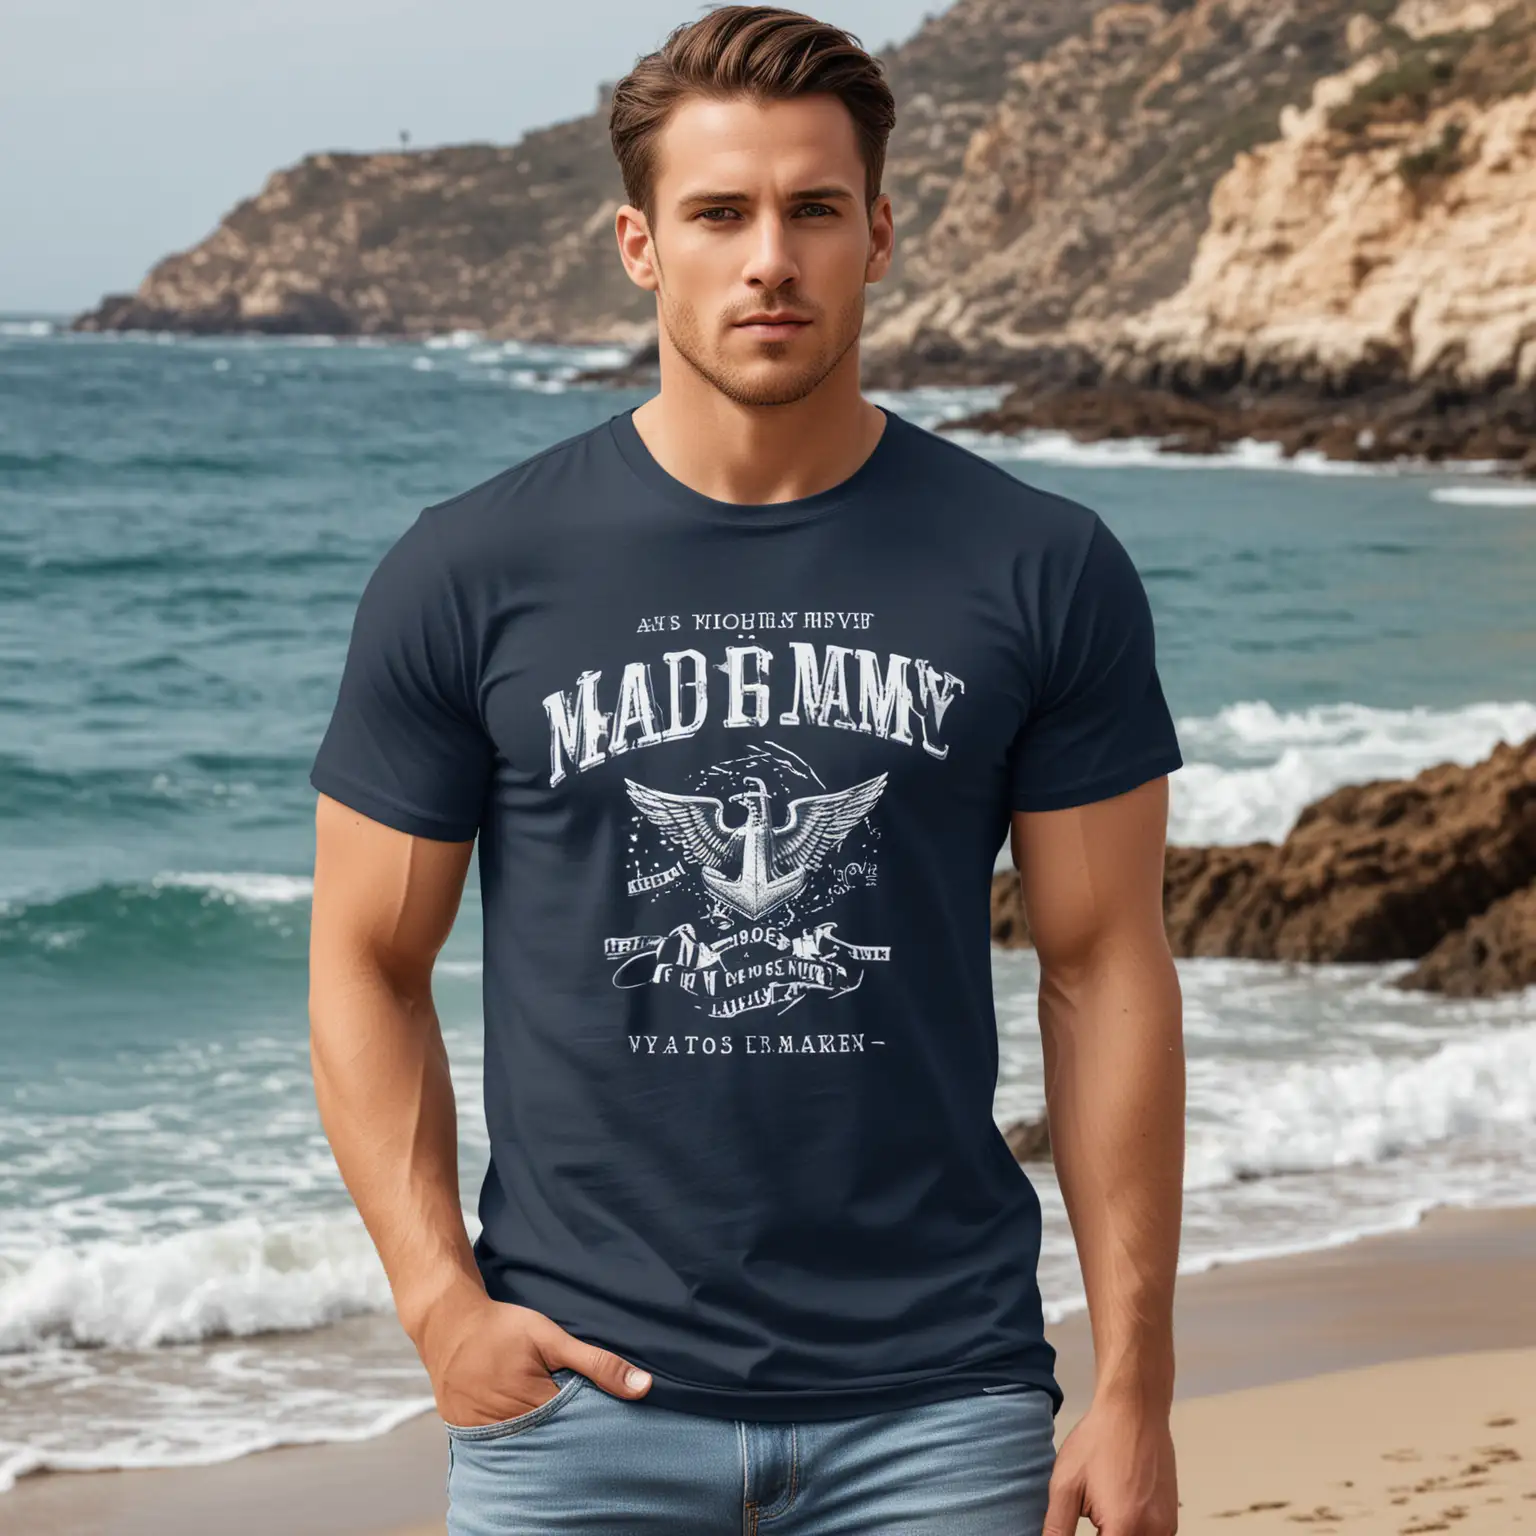 A MOCKUP FOR A NAVY TEE.  THE MODEL SHOULD BE MALE. THE BACKGROUND OF THE PHOTO SHOULD LOOK LIKE THEY ARE BY THE OCEAN.